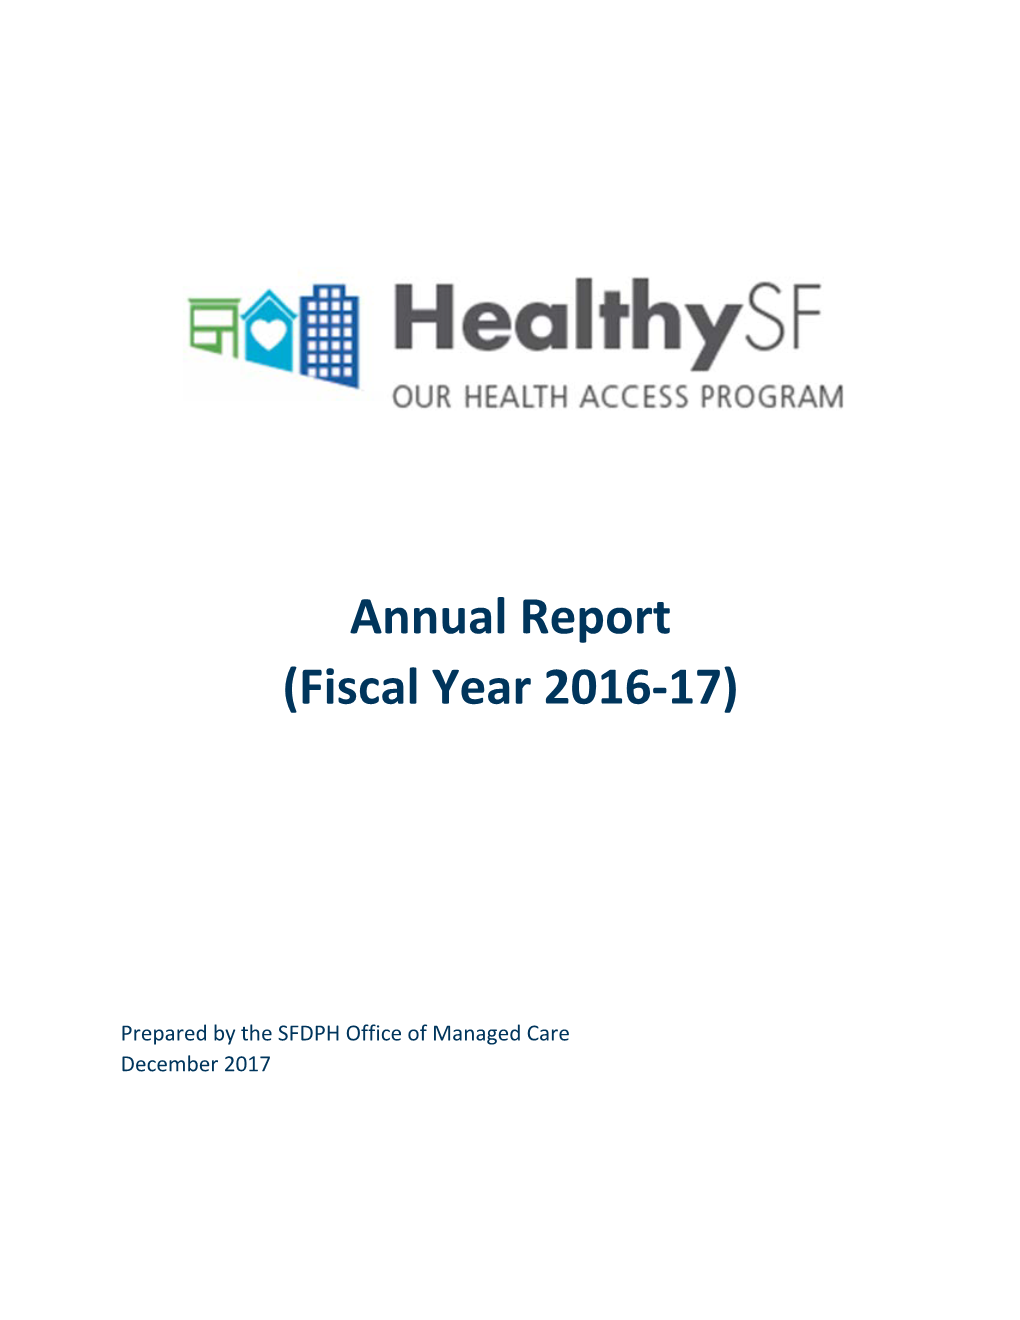 Annual Report (Fiscal Year 2016-17)